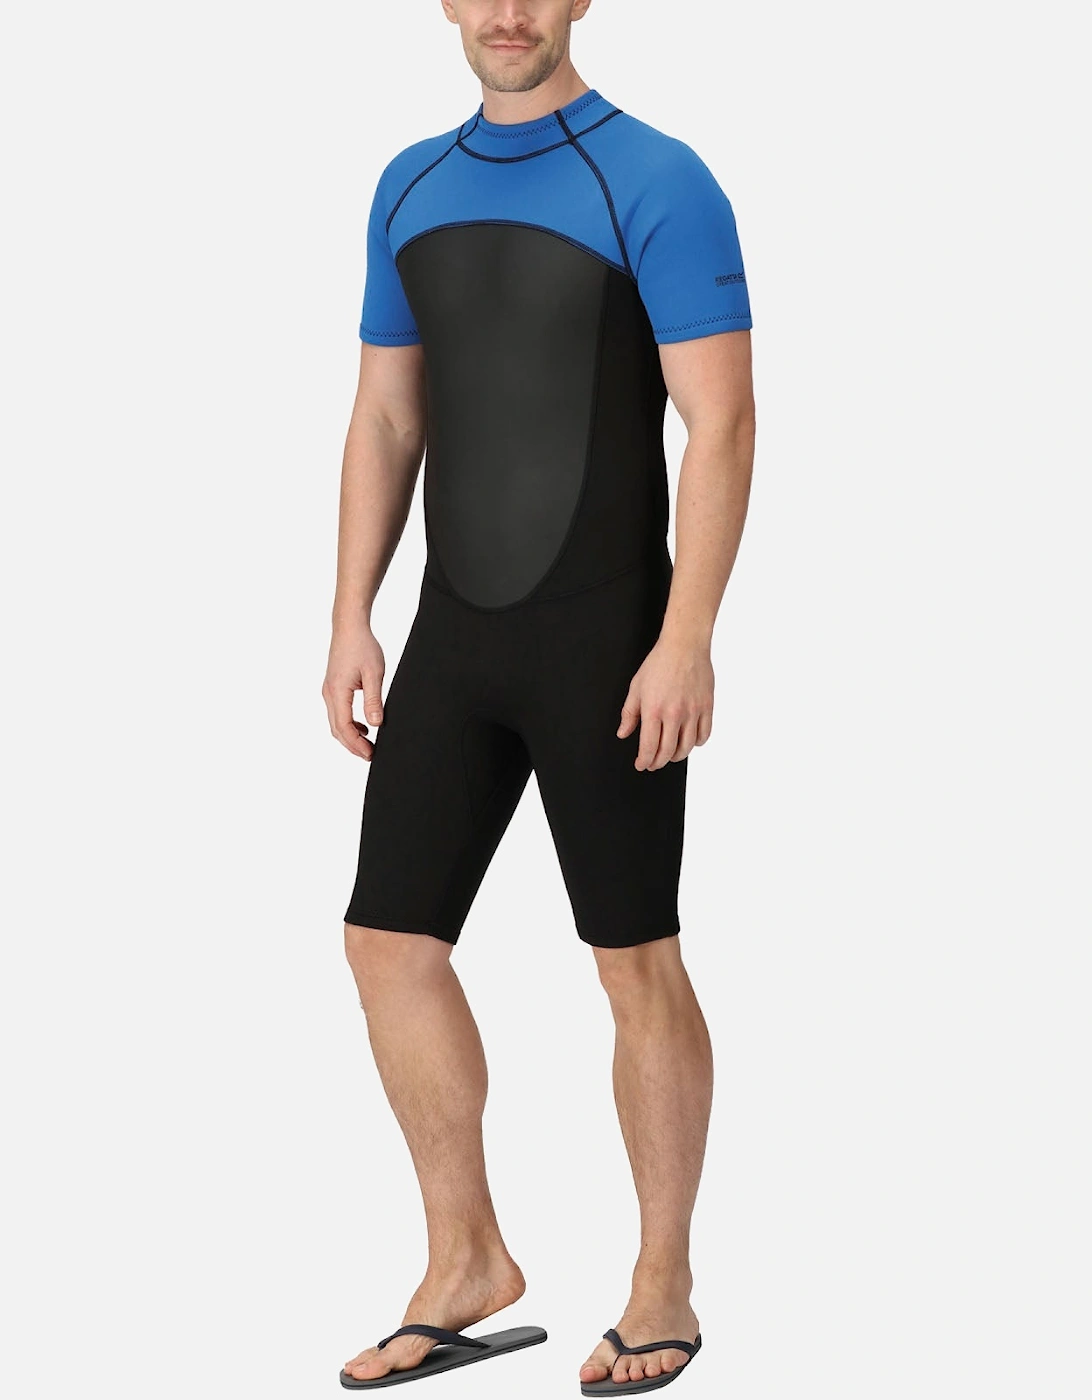 Mens Light Weight Quick Drying Short Wetsuit, 22 of 21